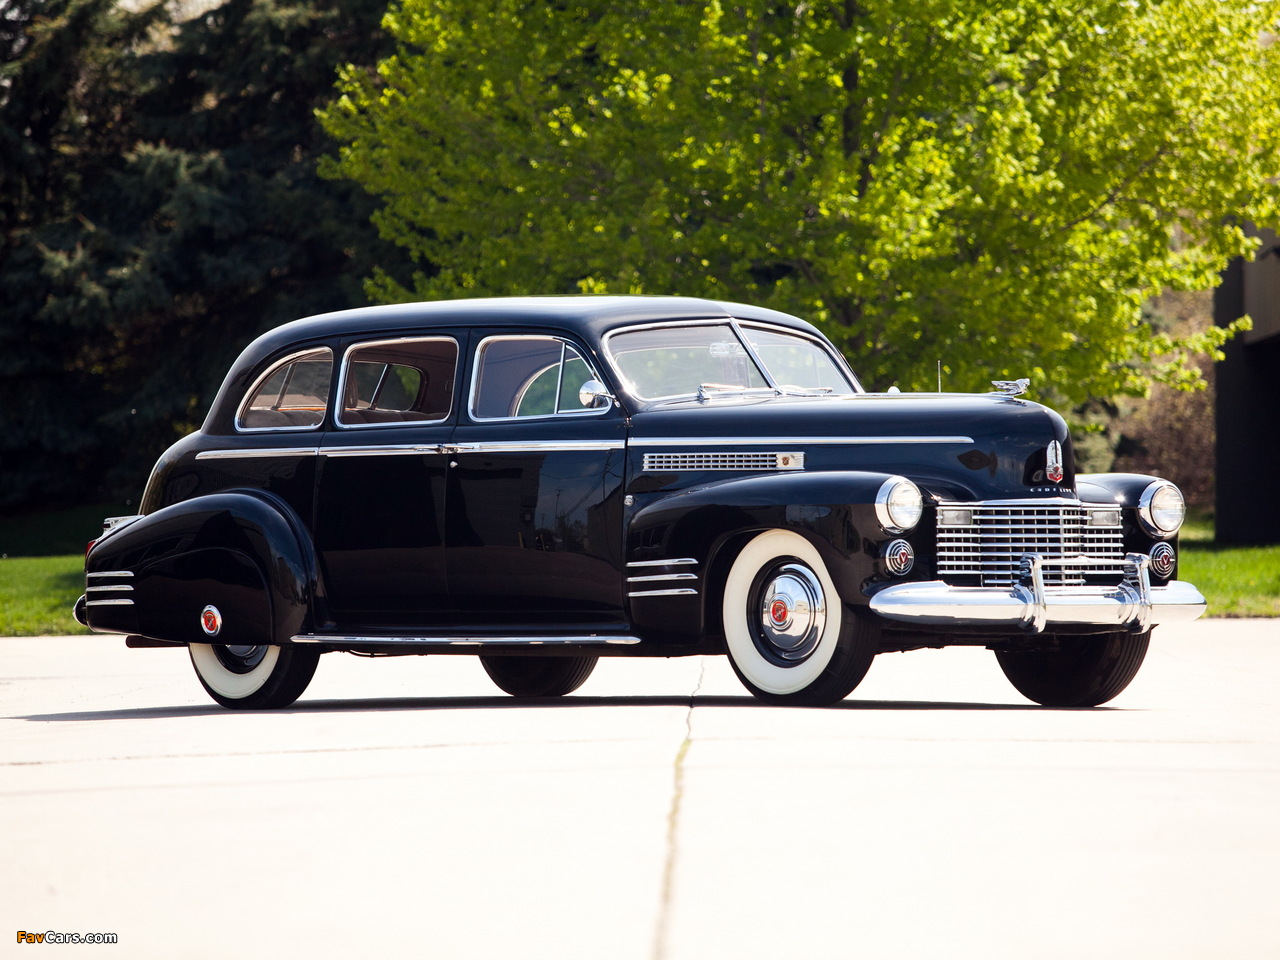 Pictures of Cadillac Fleetwood Seventy-Five Touring Sedan (41-7519) 1941 (1280 x 960)